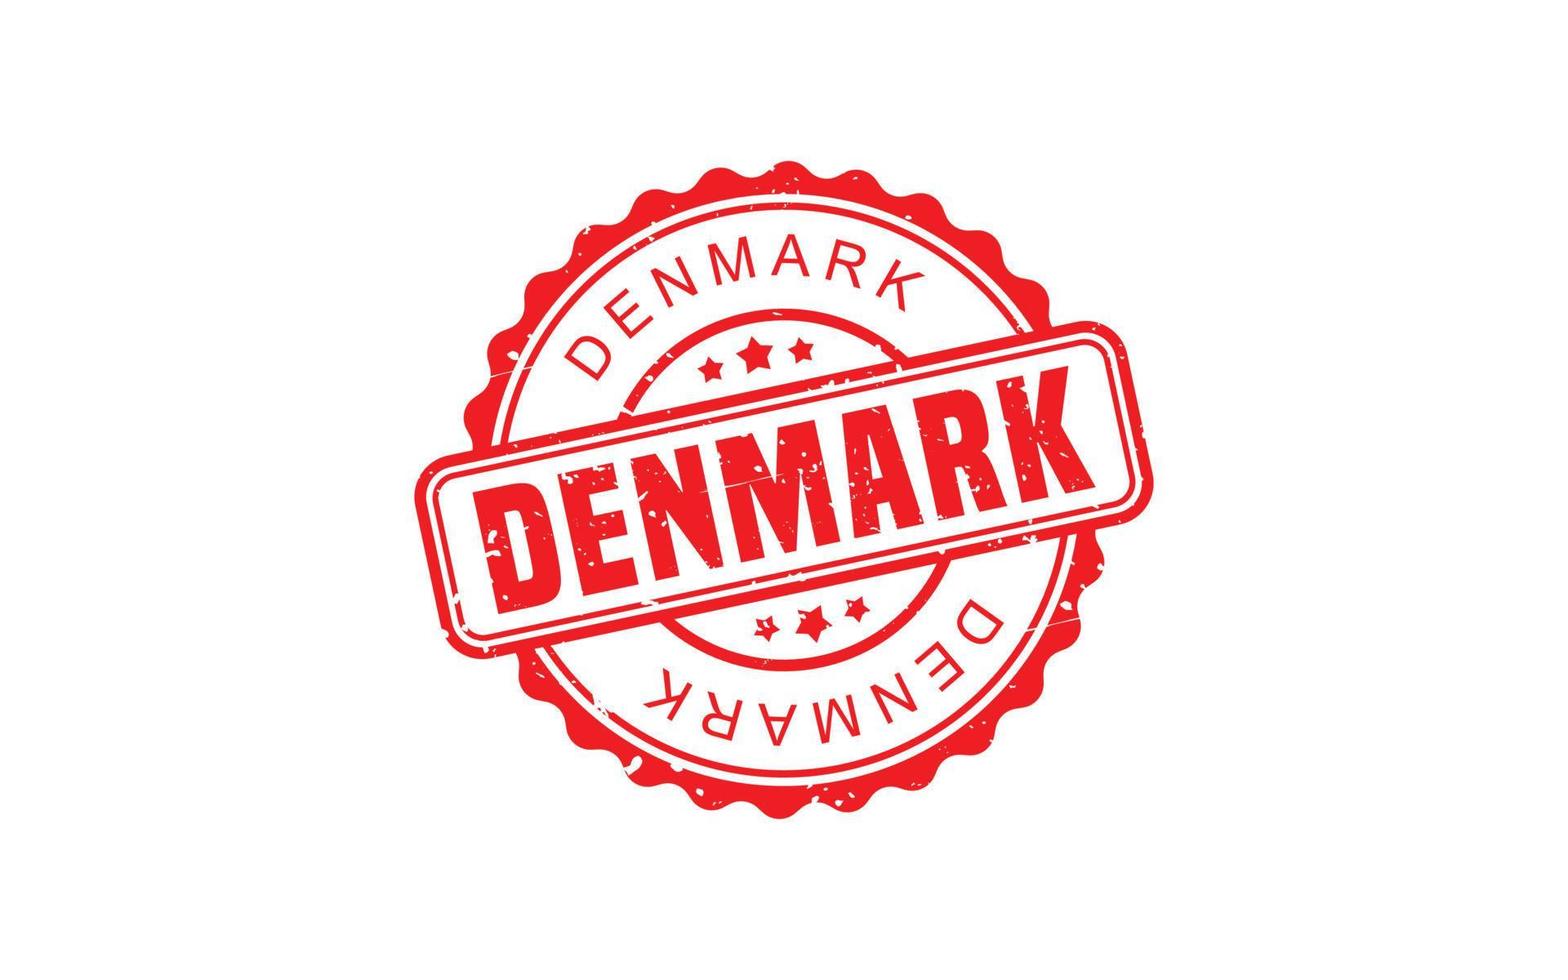 DENMARK stamp rubber with grunge style on white background vector